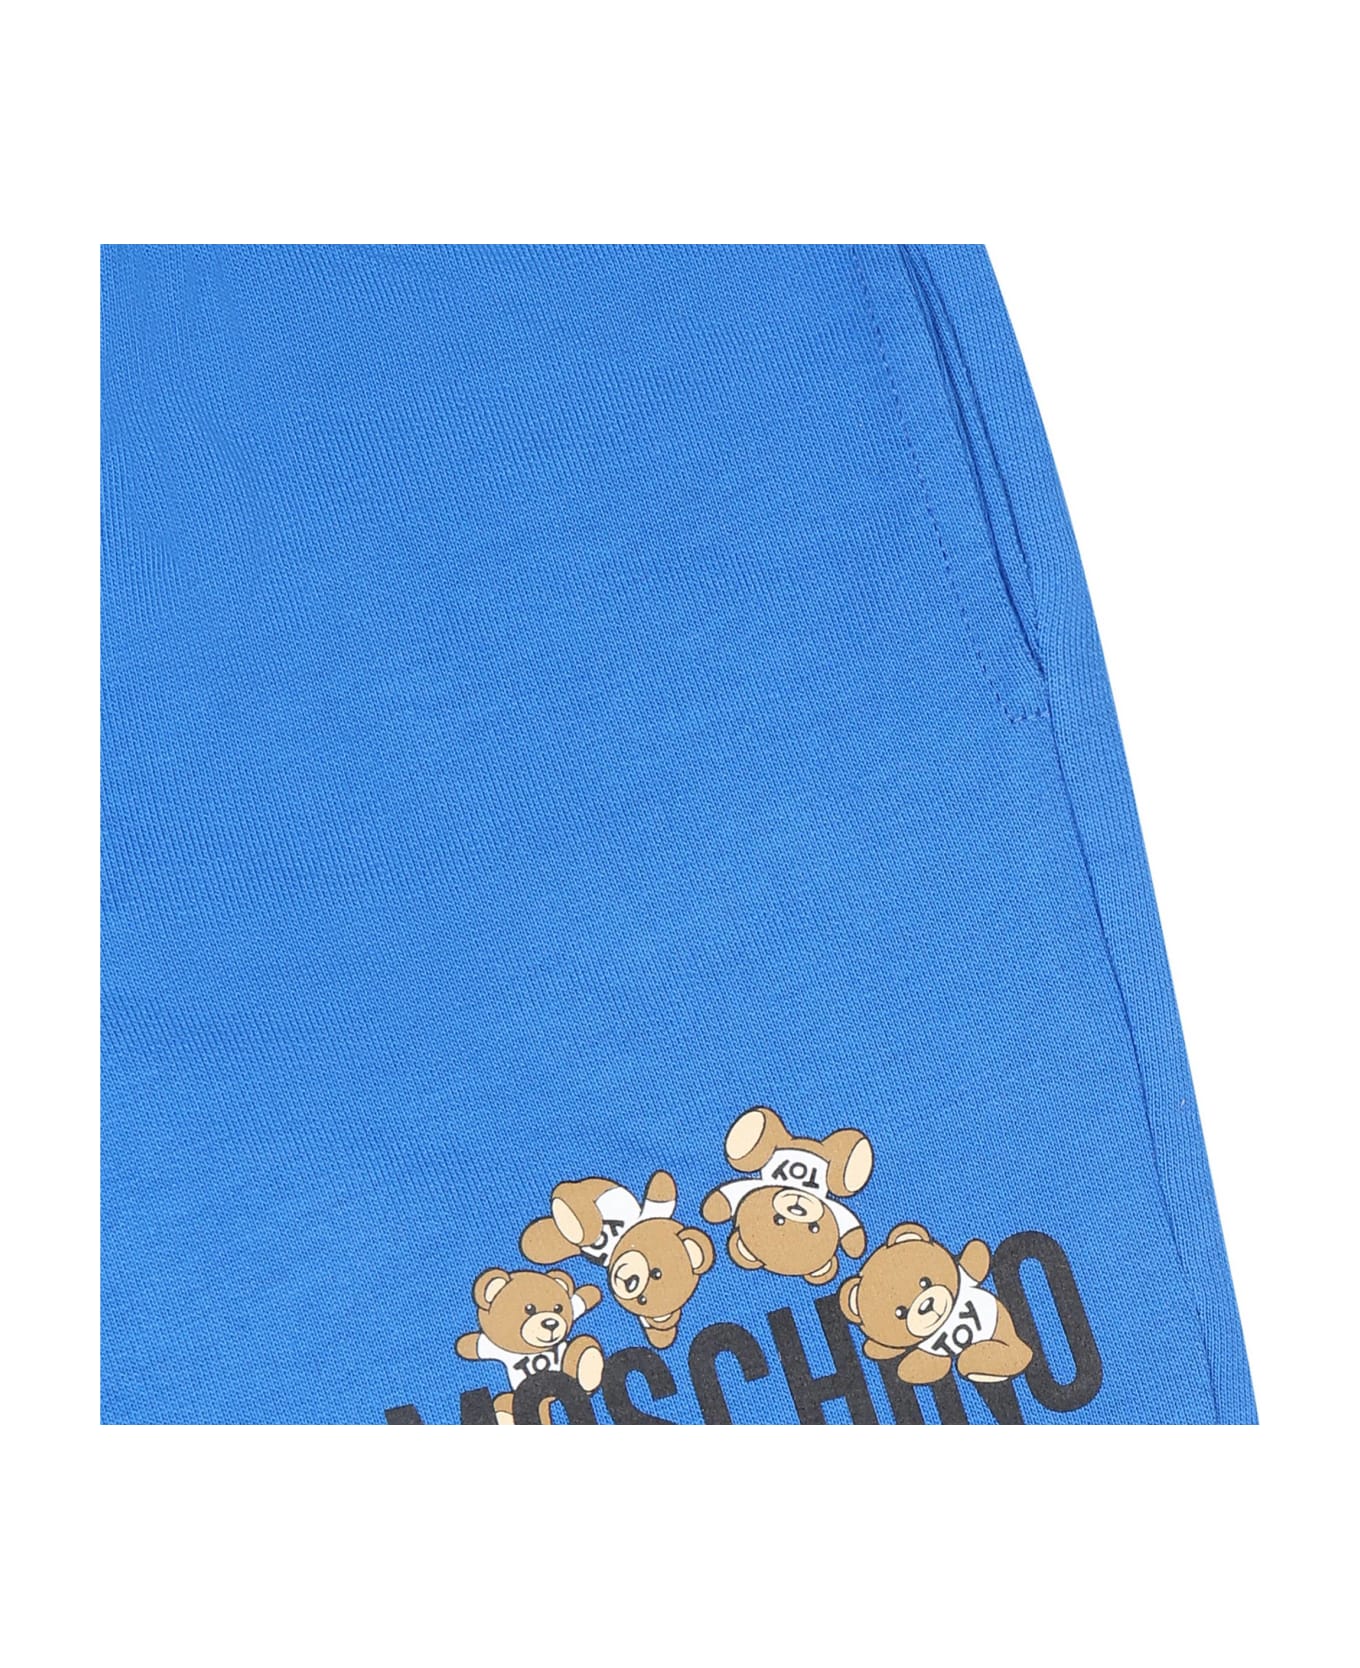 Moschino Blue Shorts For Baby Boy With Teddy Bears And Logo - Blue